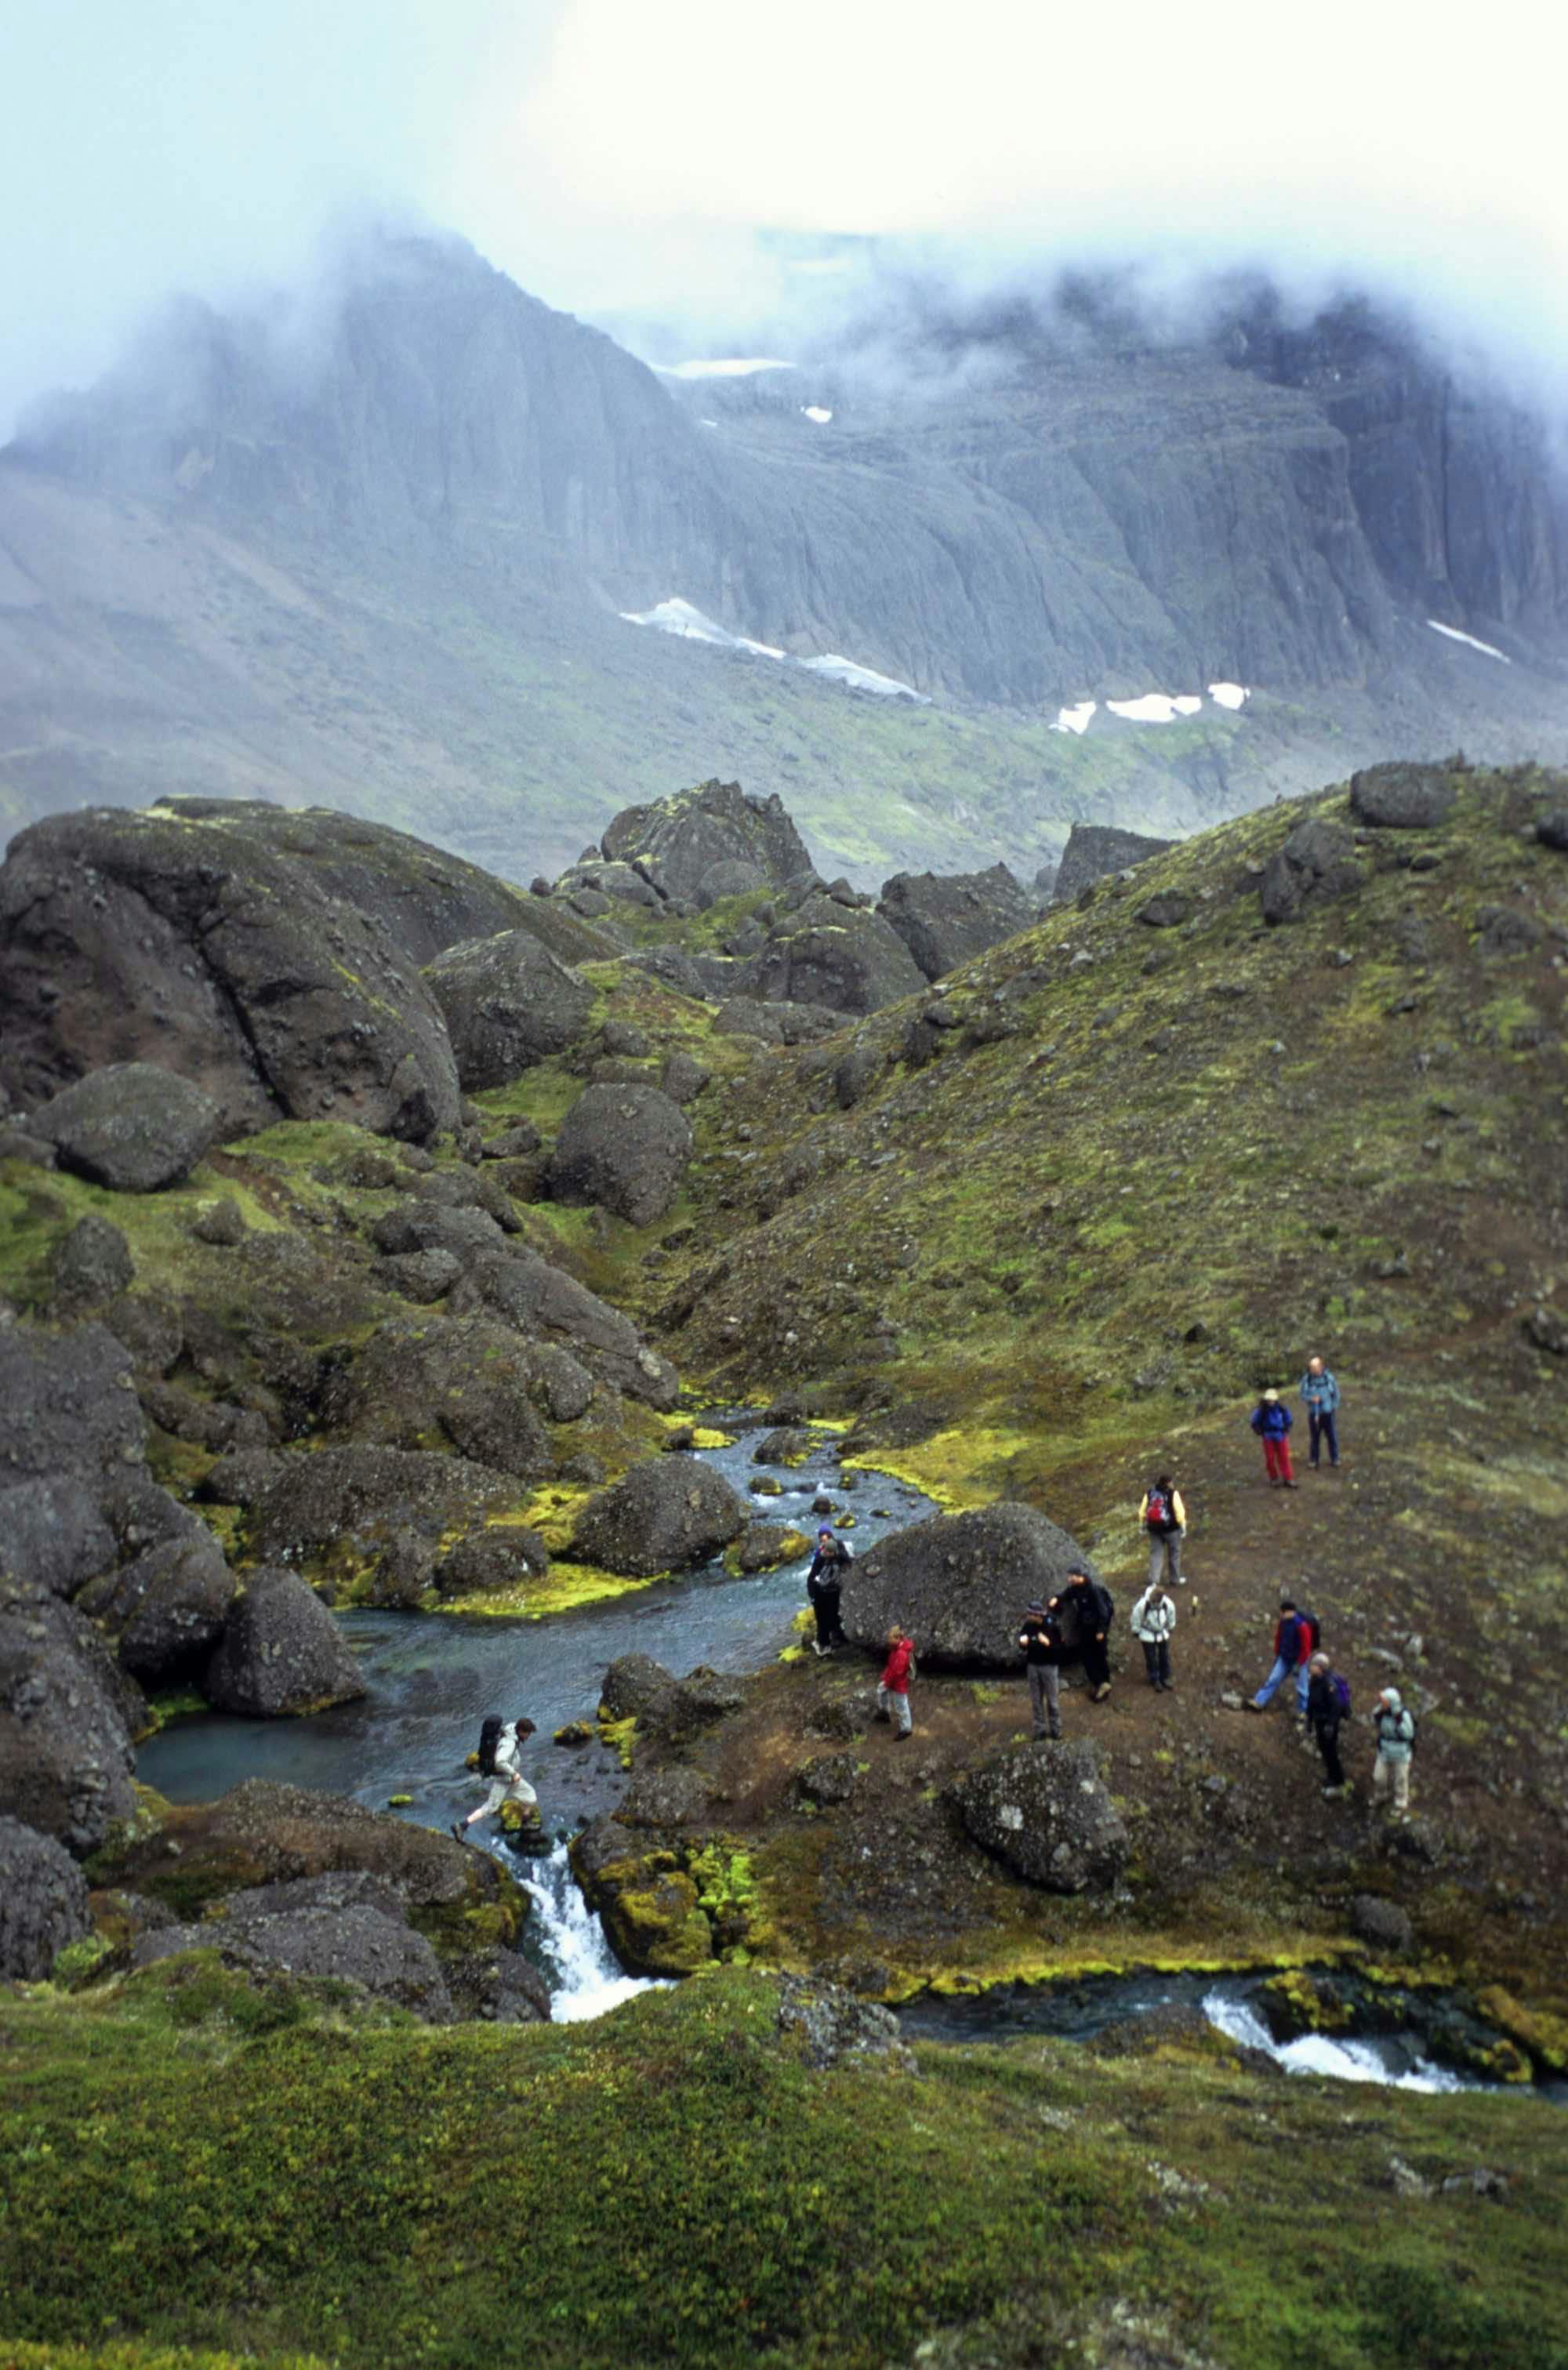 East Iceland in summer is full of mystical landscapes in summer.